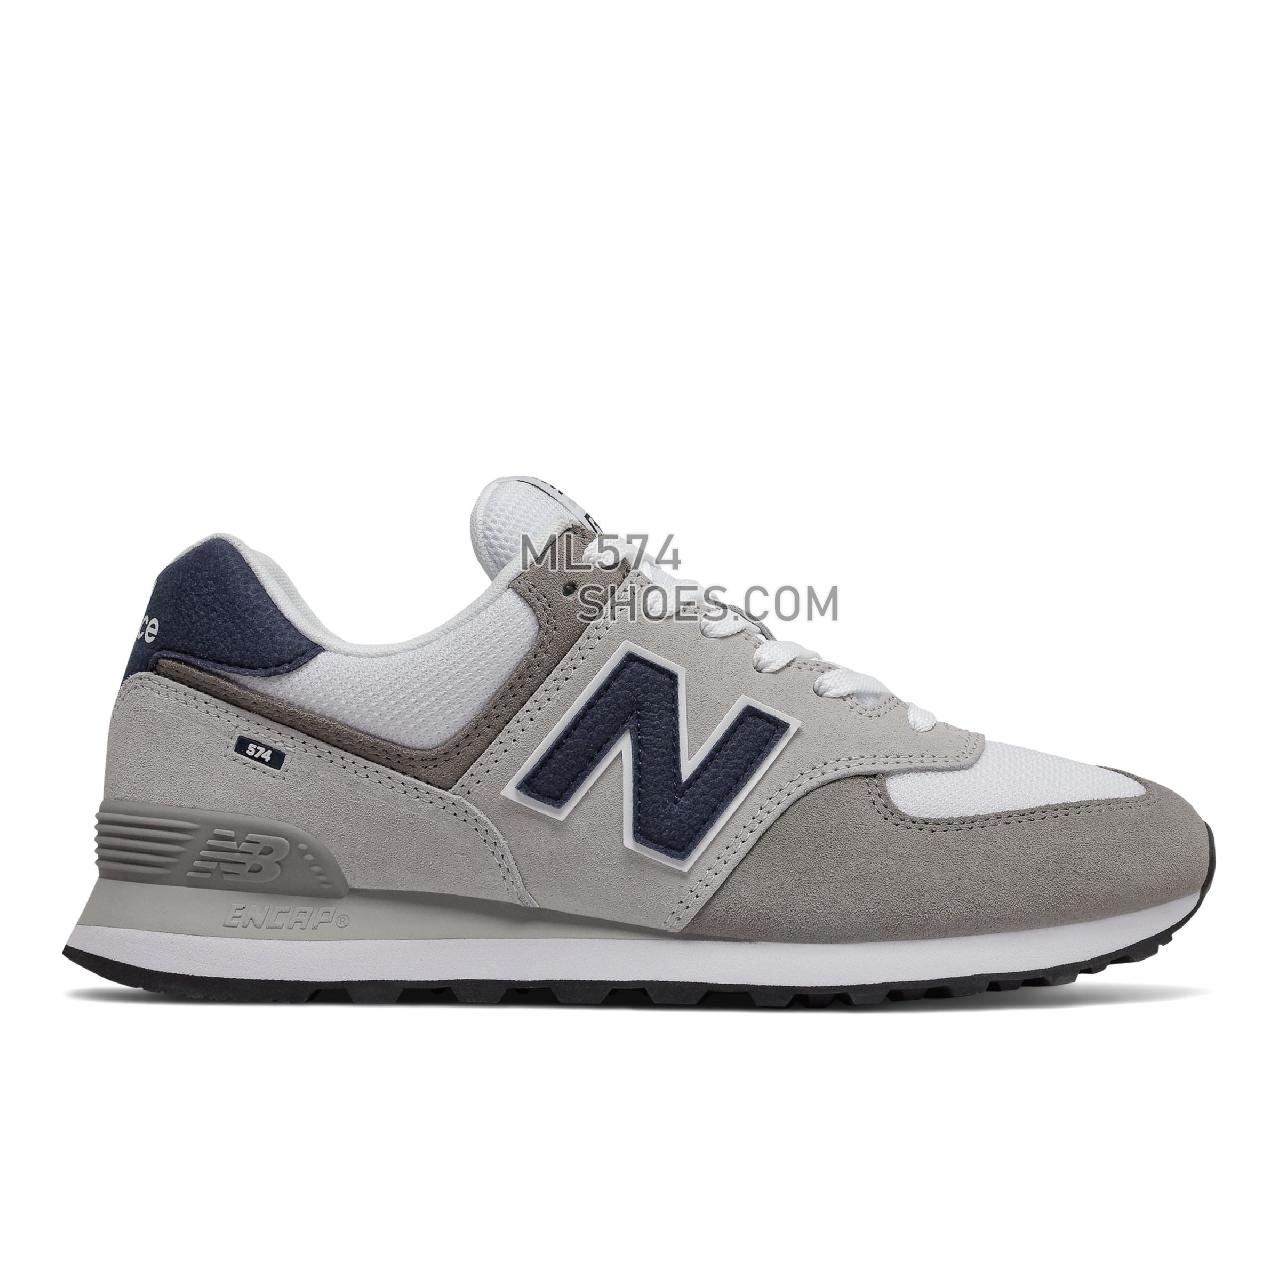 New Balance 574v2 - Men's Classic Sneakers - Rain Cloud with White - ML574EAG